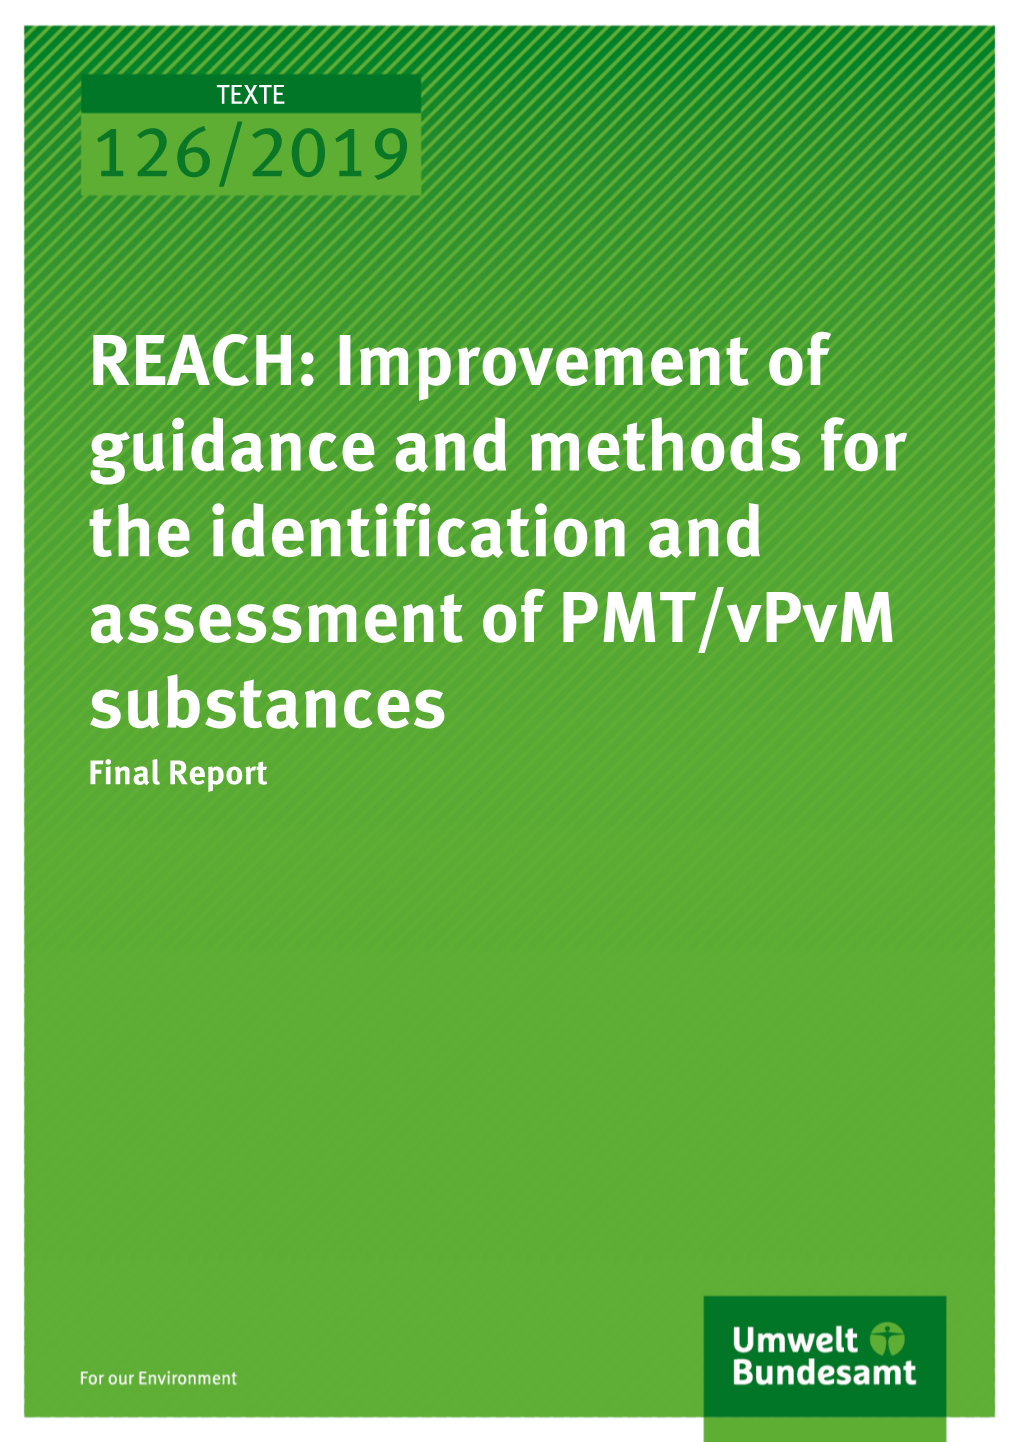 REACH: Improvement of Guidance Methods for the Identification and Evaluation of PM/PMT Substances